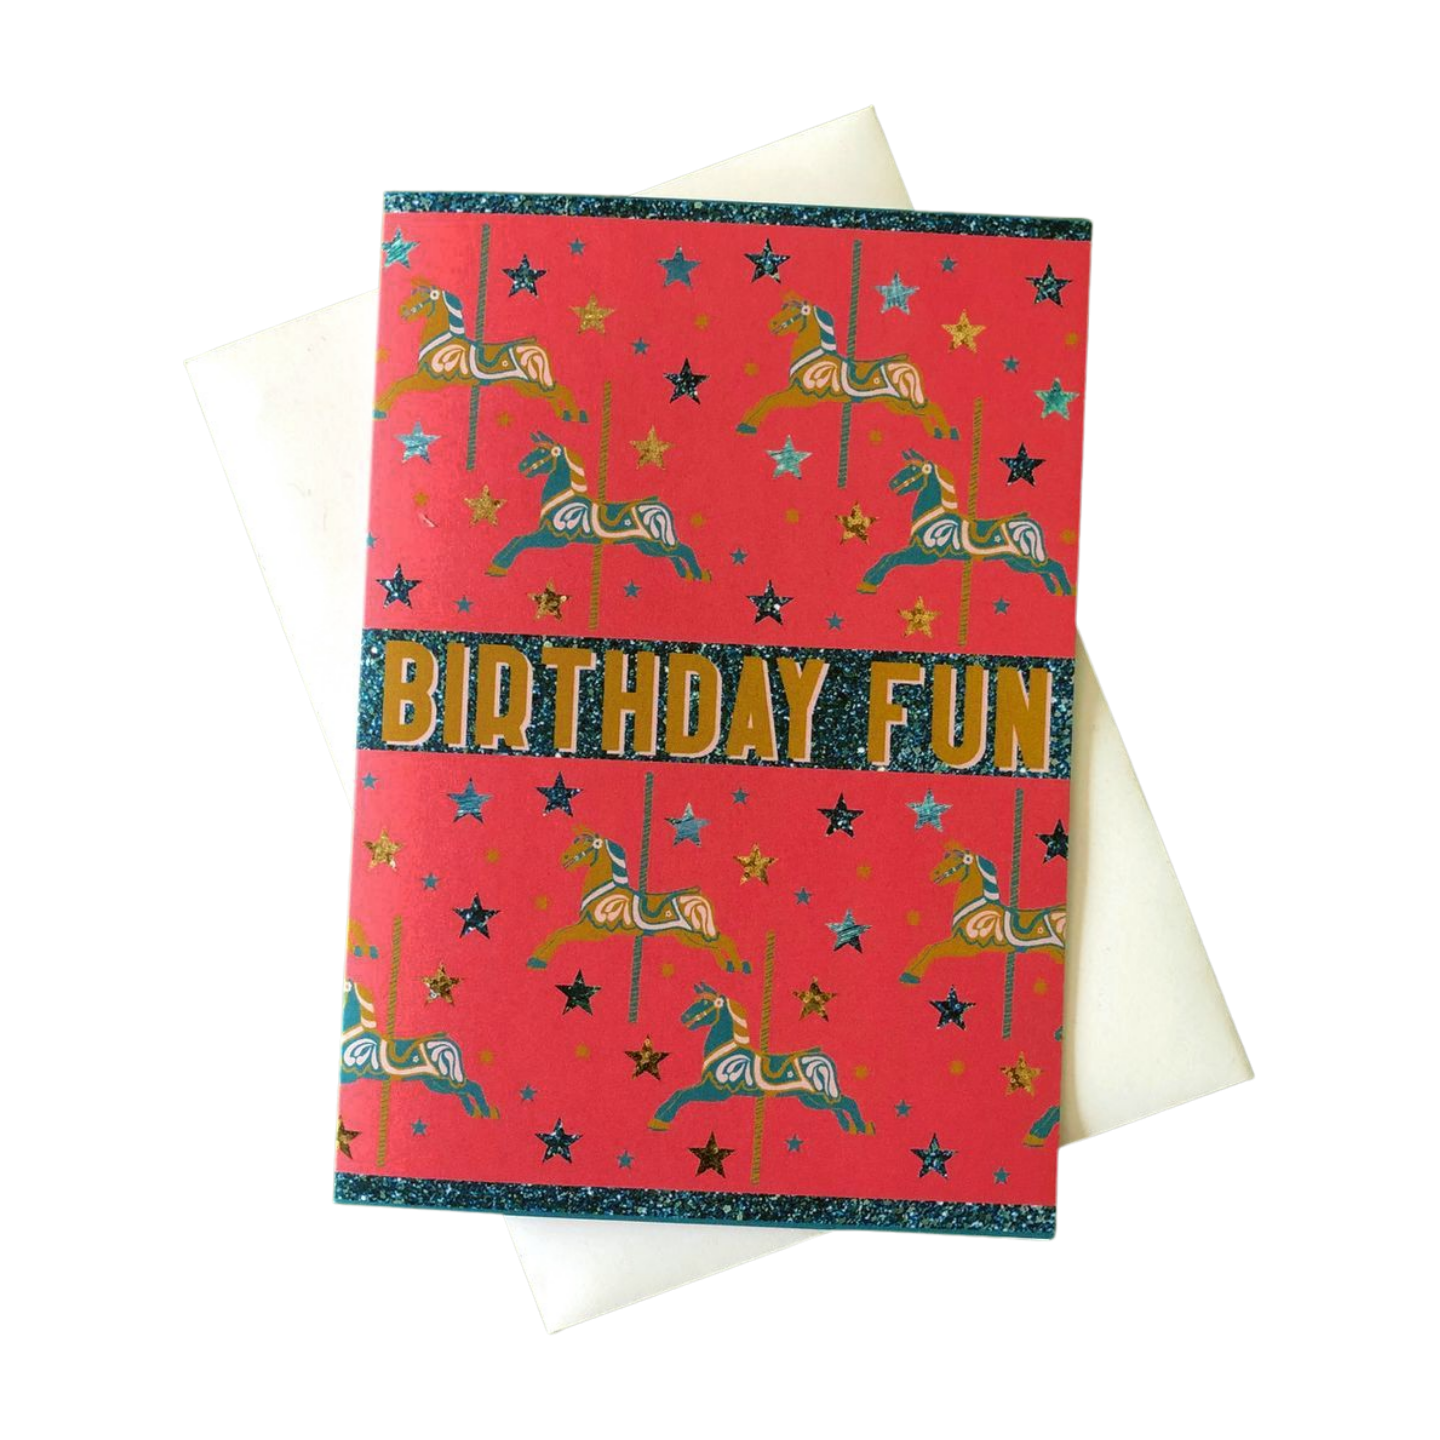 Bright and fun birthday card featuring a carousel horse design on a white background